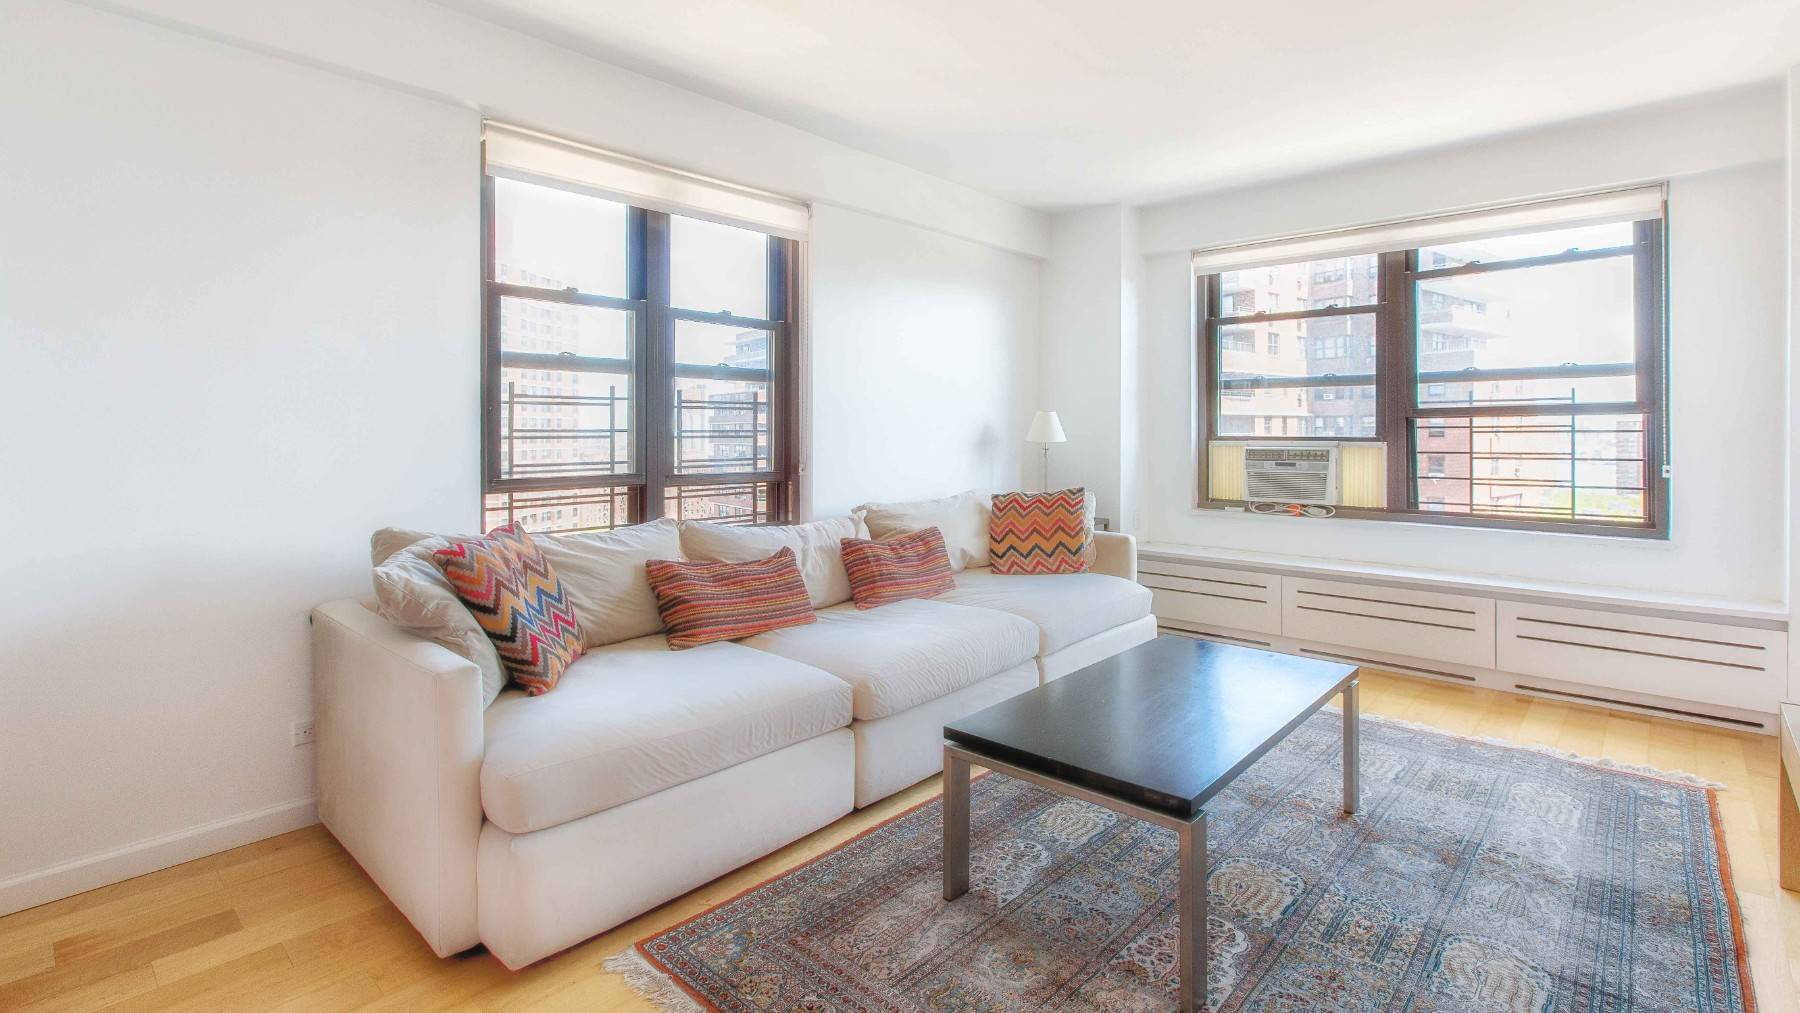 Light filled, turn key, move in ready 4 bedroom, 2 bath apartment in the sought after Seward Park Cooperatives located in the vibrant Lower East Side neighborhood.